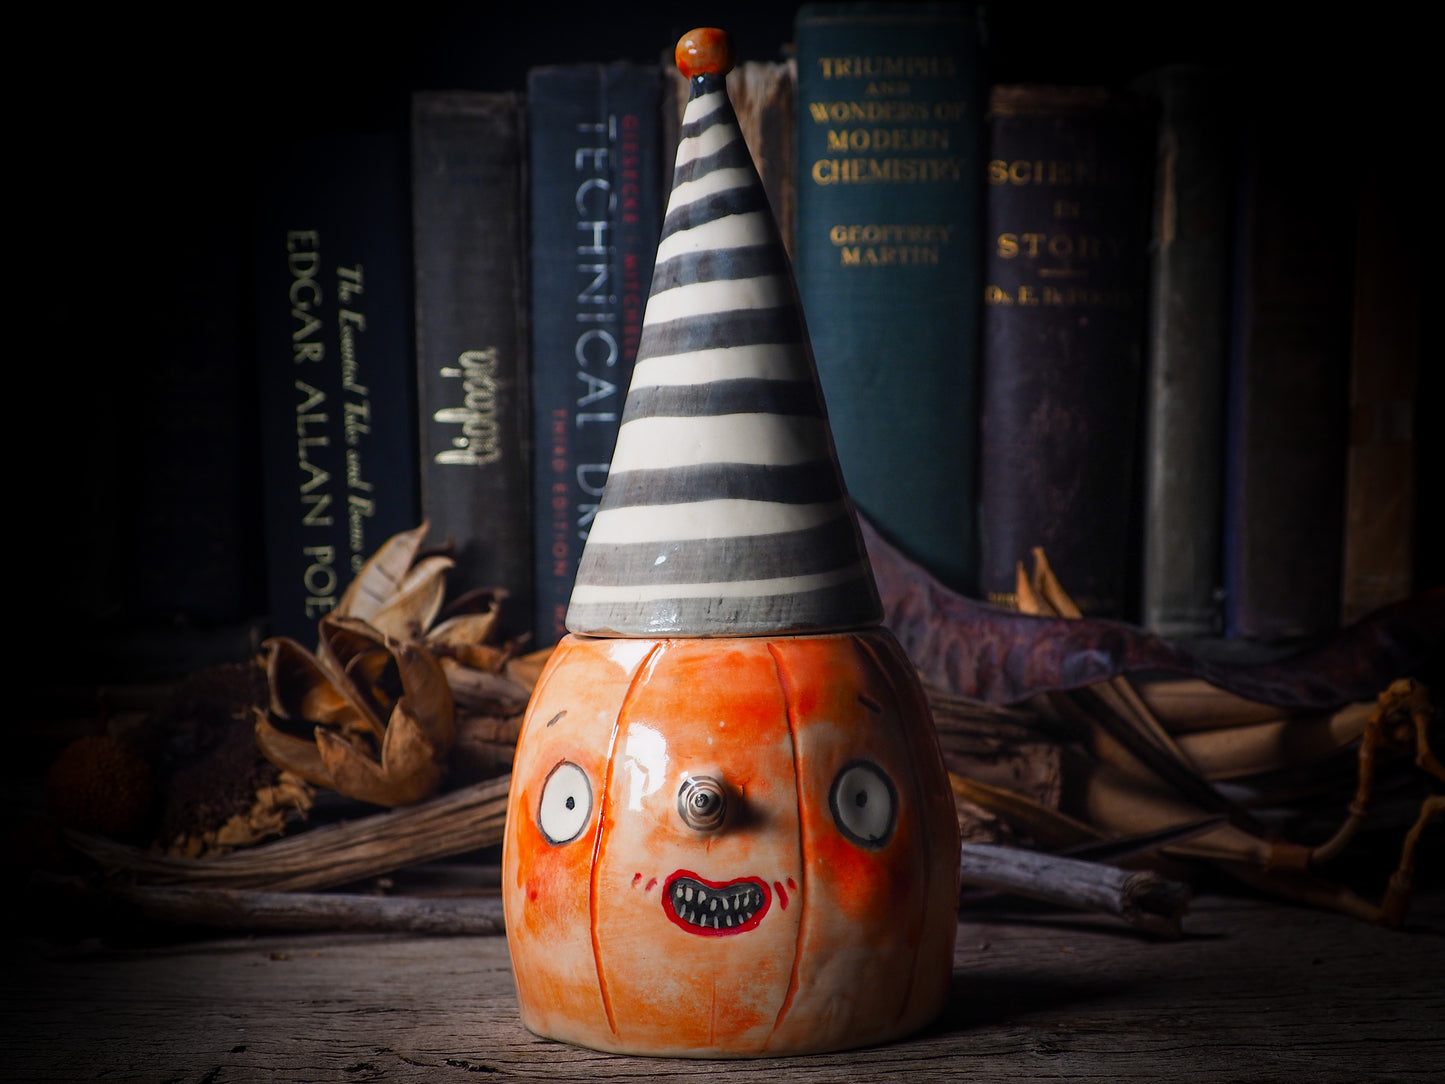 Fire glazed ceramic figurine by Idania Salcido, Danita Art. On Halloween, Danita creates spooky cute hand made ceramic figures to decorate your home in the scariest holiday of the year. Ghosts, witches, ghouls, vampires, black cats, pumpkins, jack-o-lantern and creatures of the night in glazed ceramic home decor.